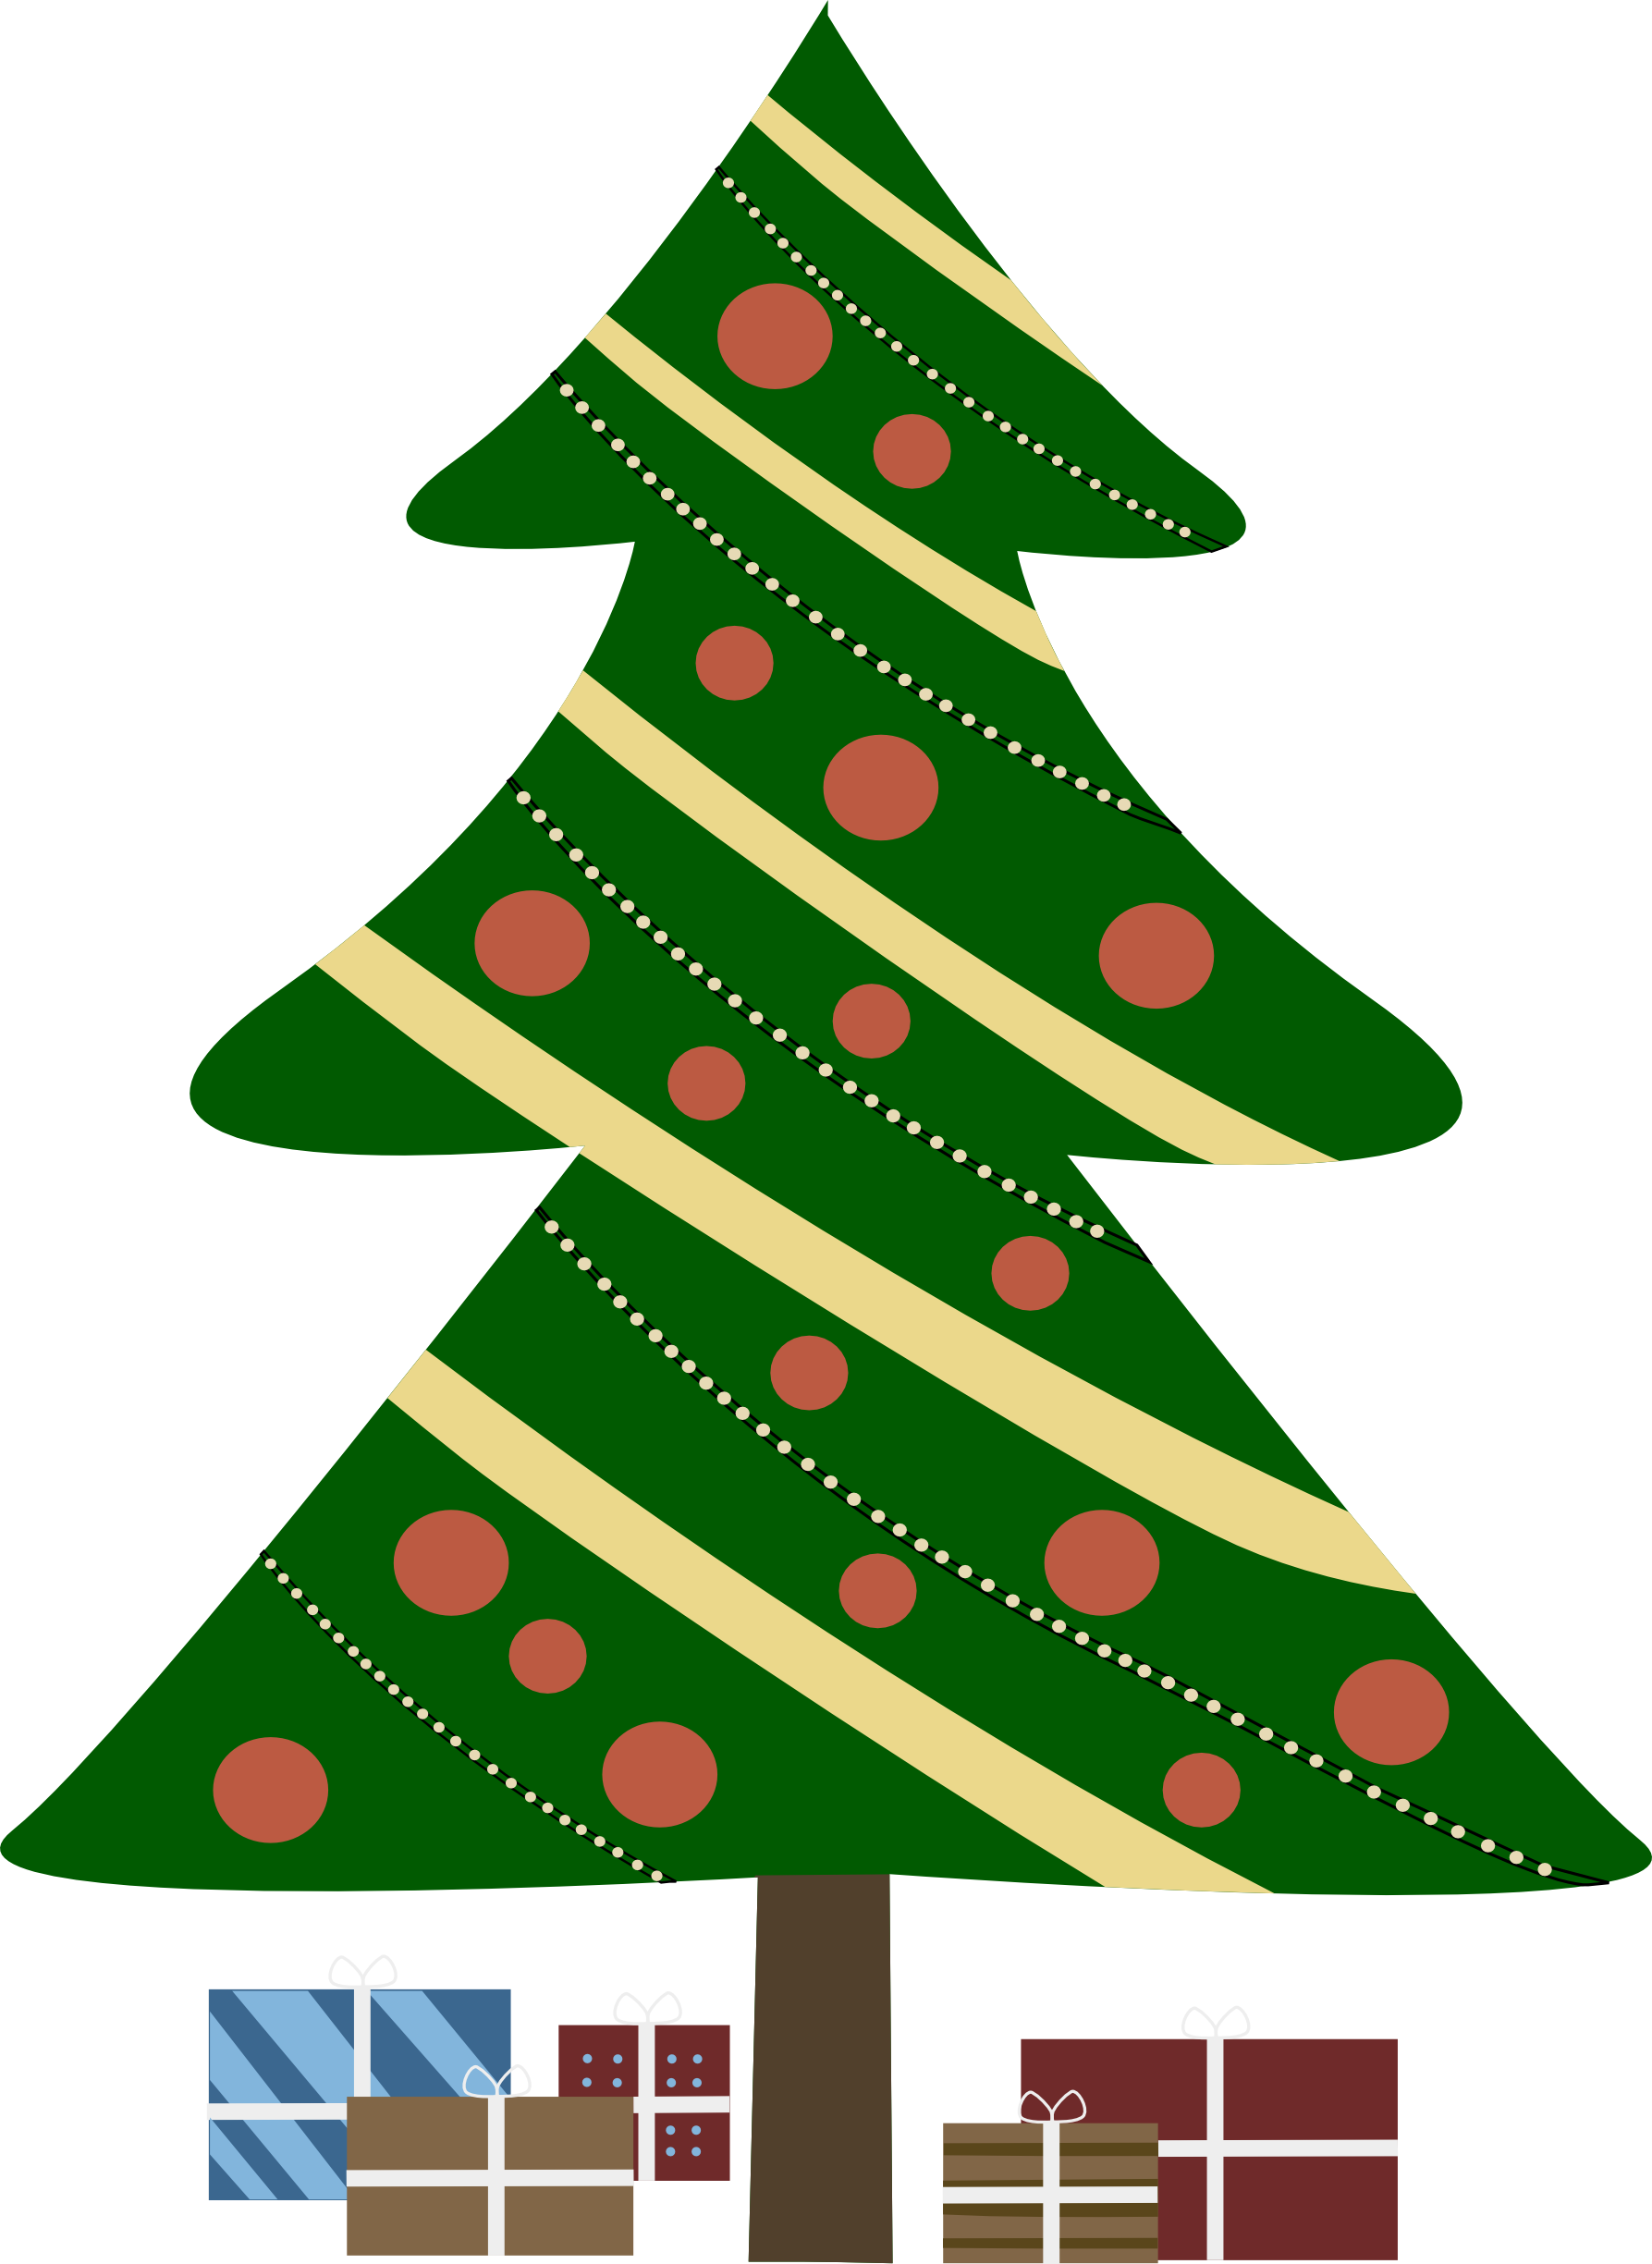 Free Animated Tree Pictures, Download Free Animated Tree Pictures png